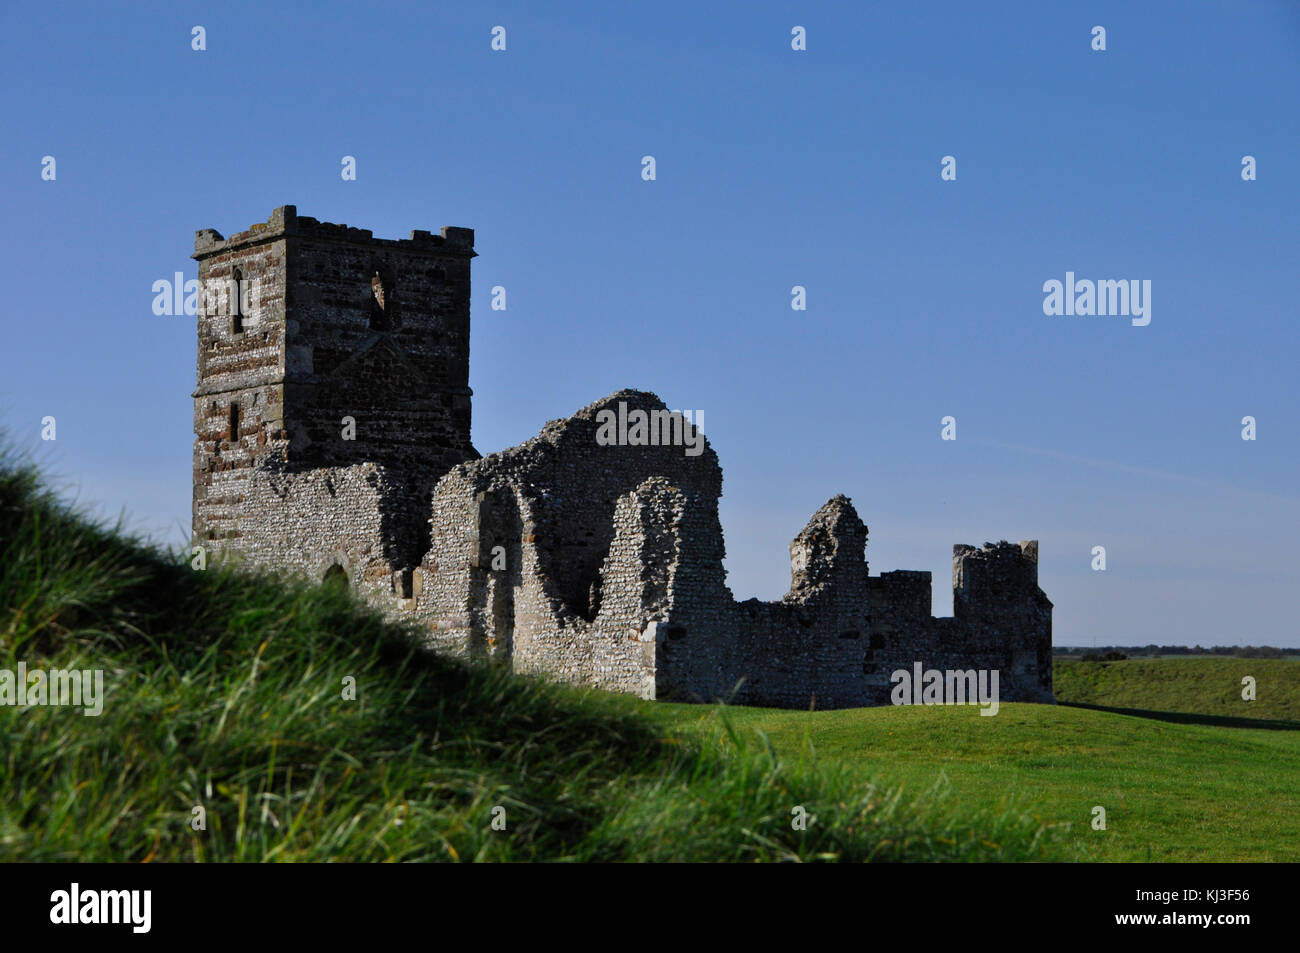 Knowlton Norman church, built in the 12th century, surrounded by a Neolithic ritual henge earthwork. Wimborne Dorset England UK Stock Photo